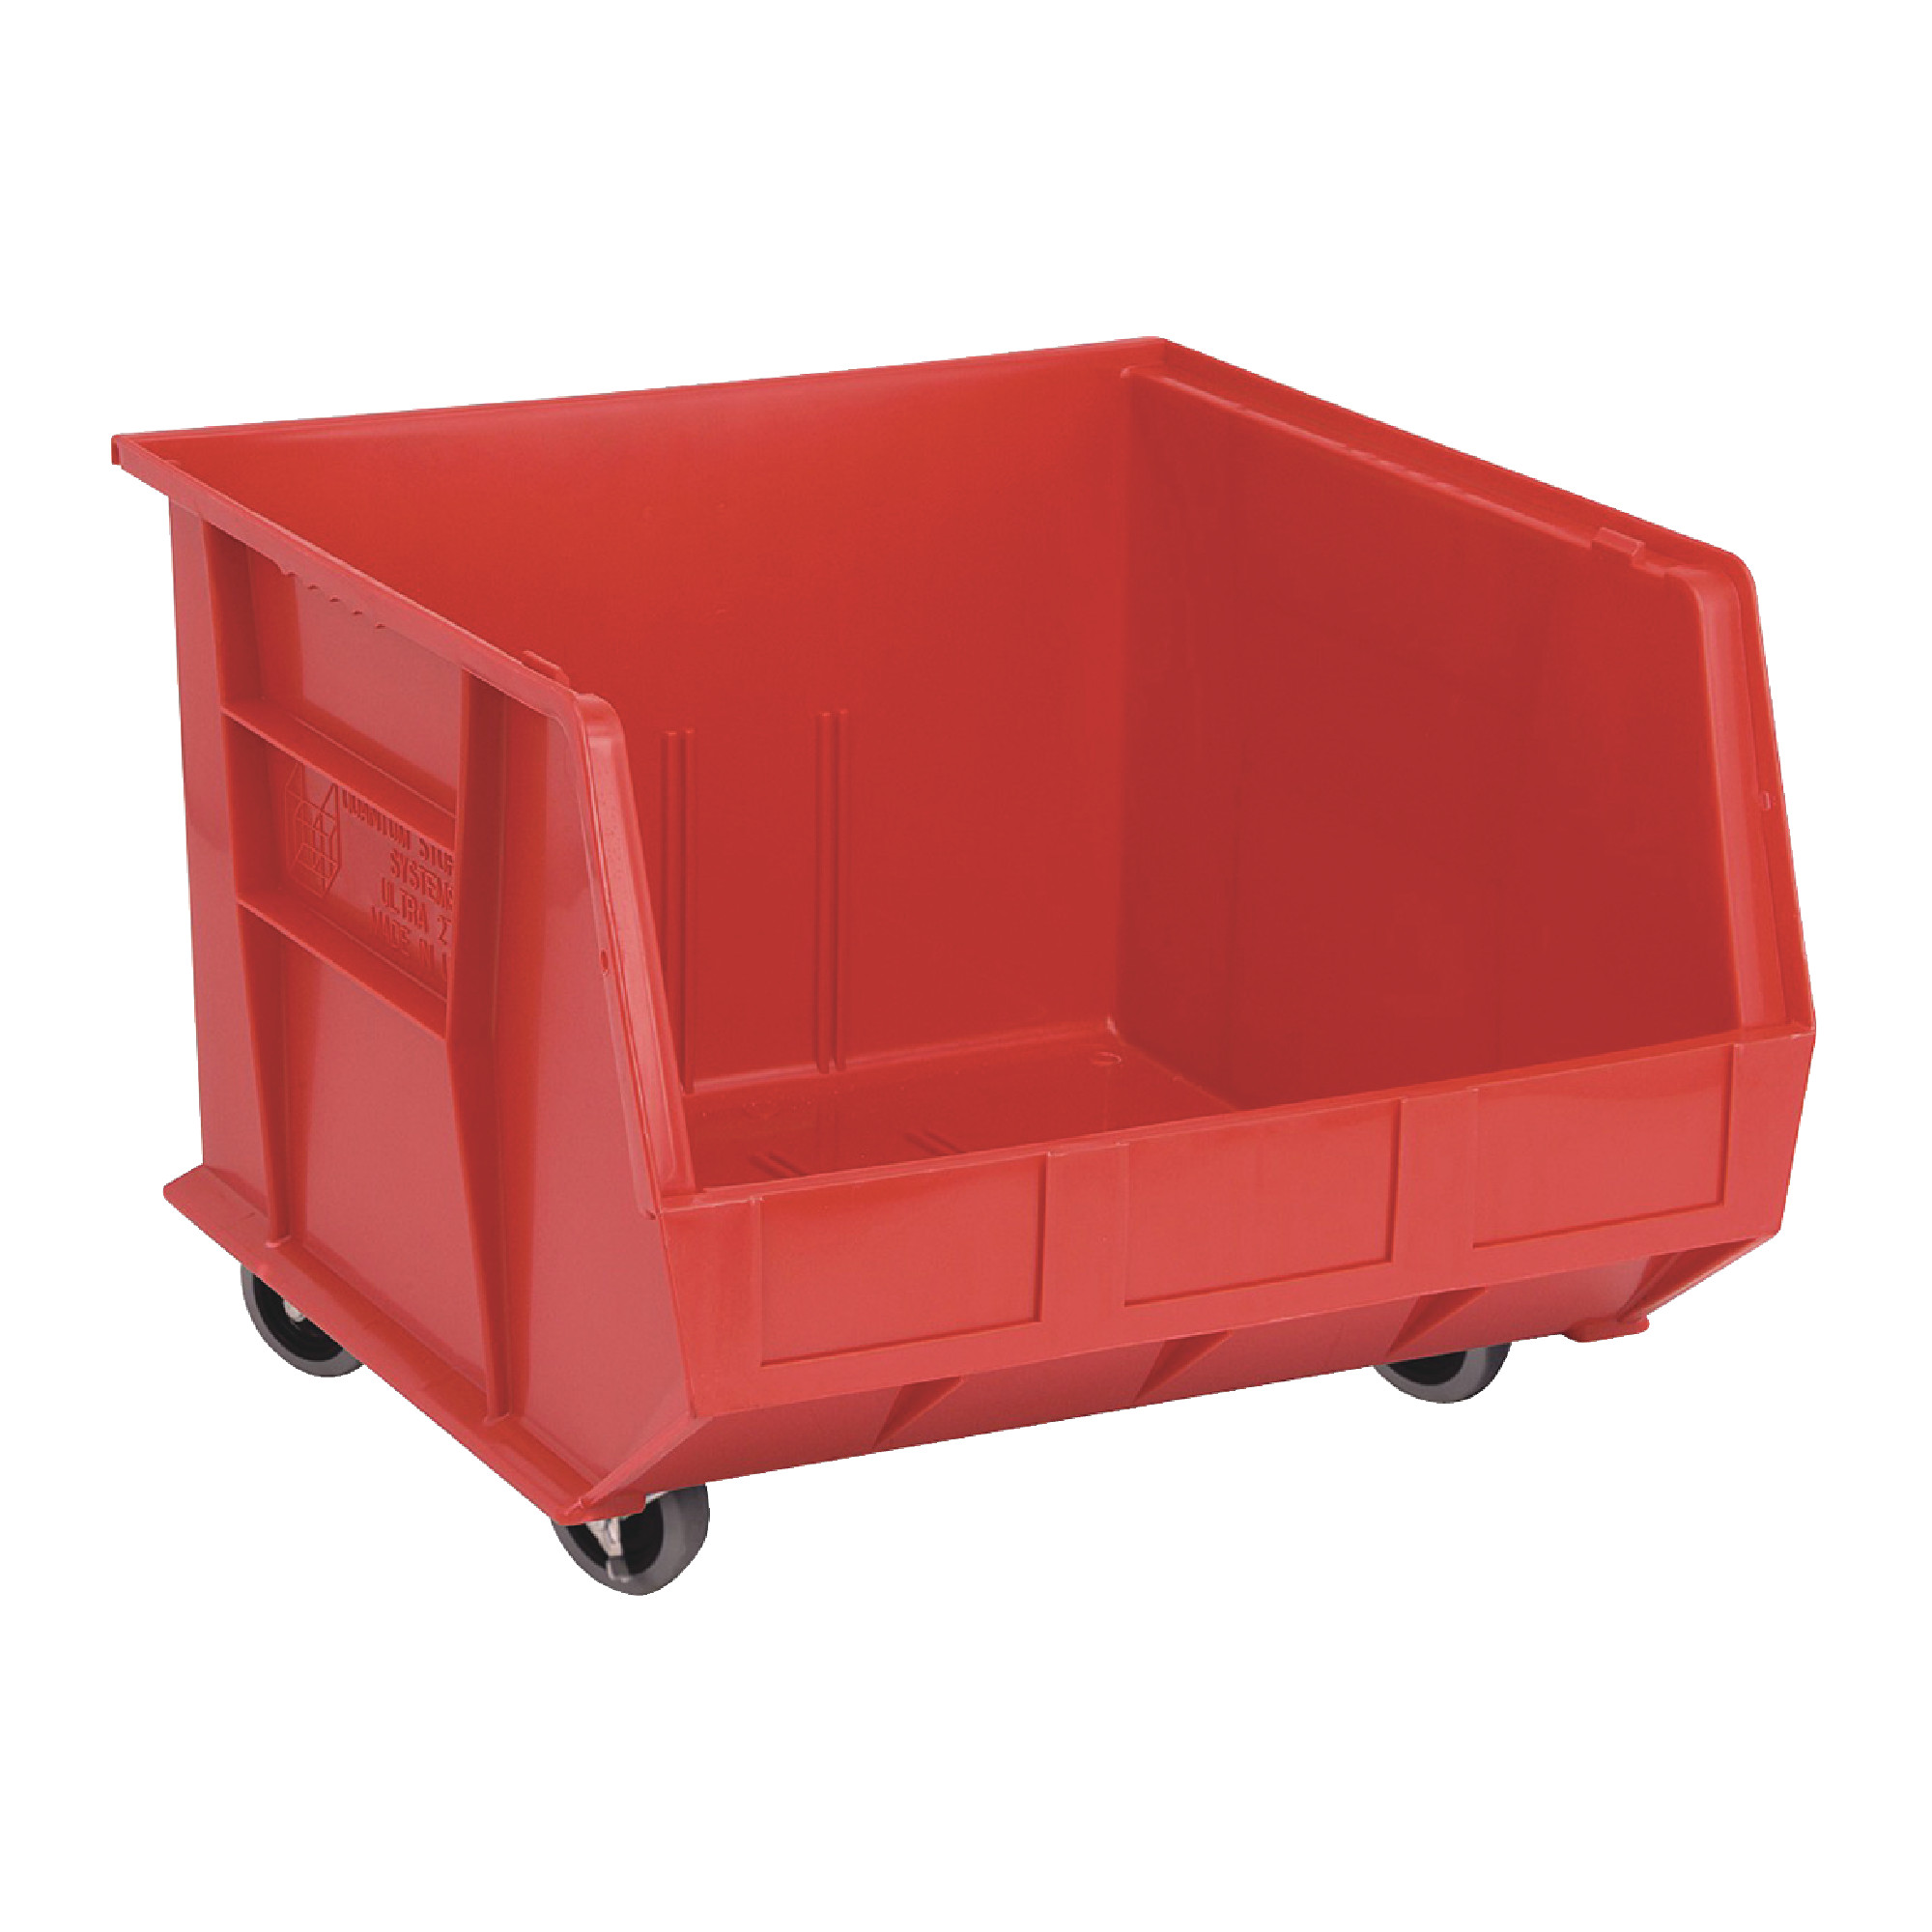 QUANTUM STORAGE SYSTEMS 18" x 16-1/2" x 11" Red Ultra Stanck & Hang Mobile Bins - 3/Pack